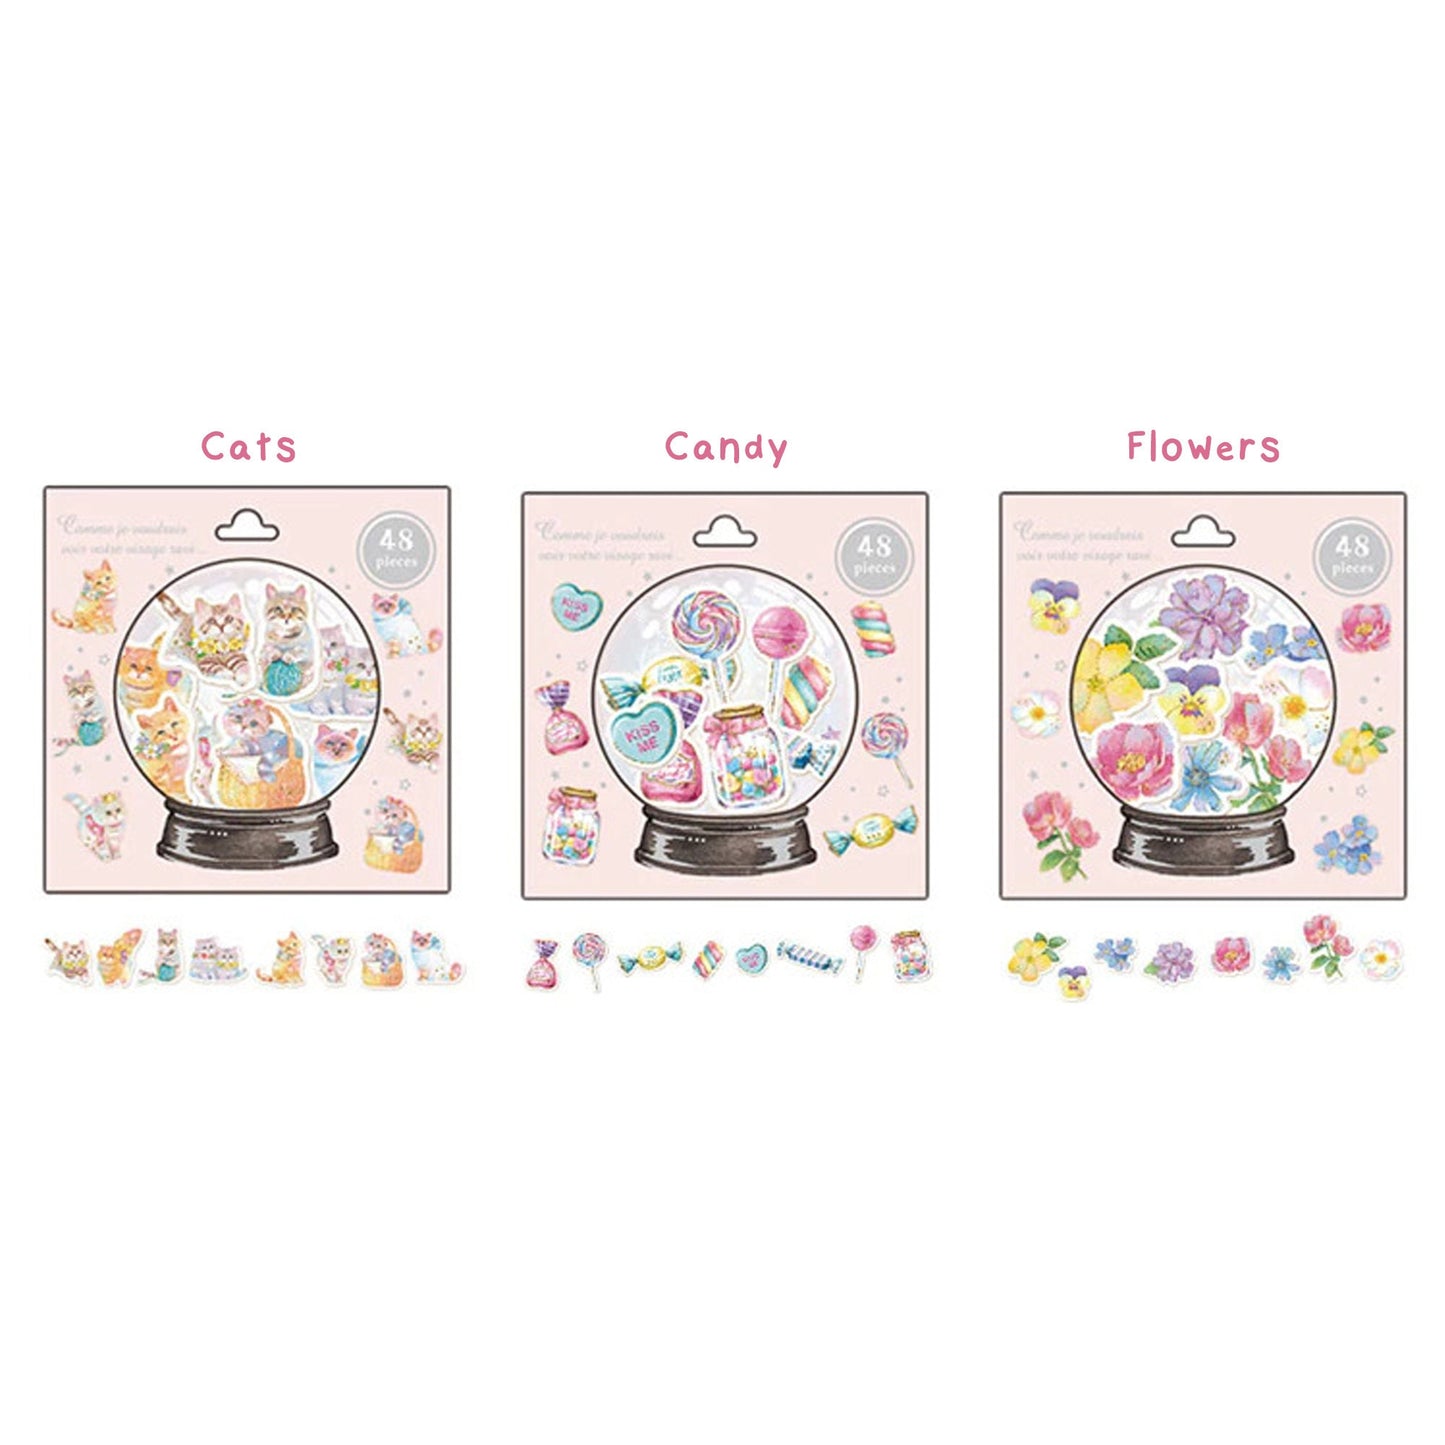 Kawaii Planner Stickers - Cute Stickers - Crystal Ball Washi Stickers - Kawaii stickers - Journal Flakes Stickers, Gold Foil Stickers b2i1